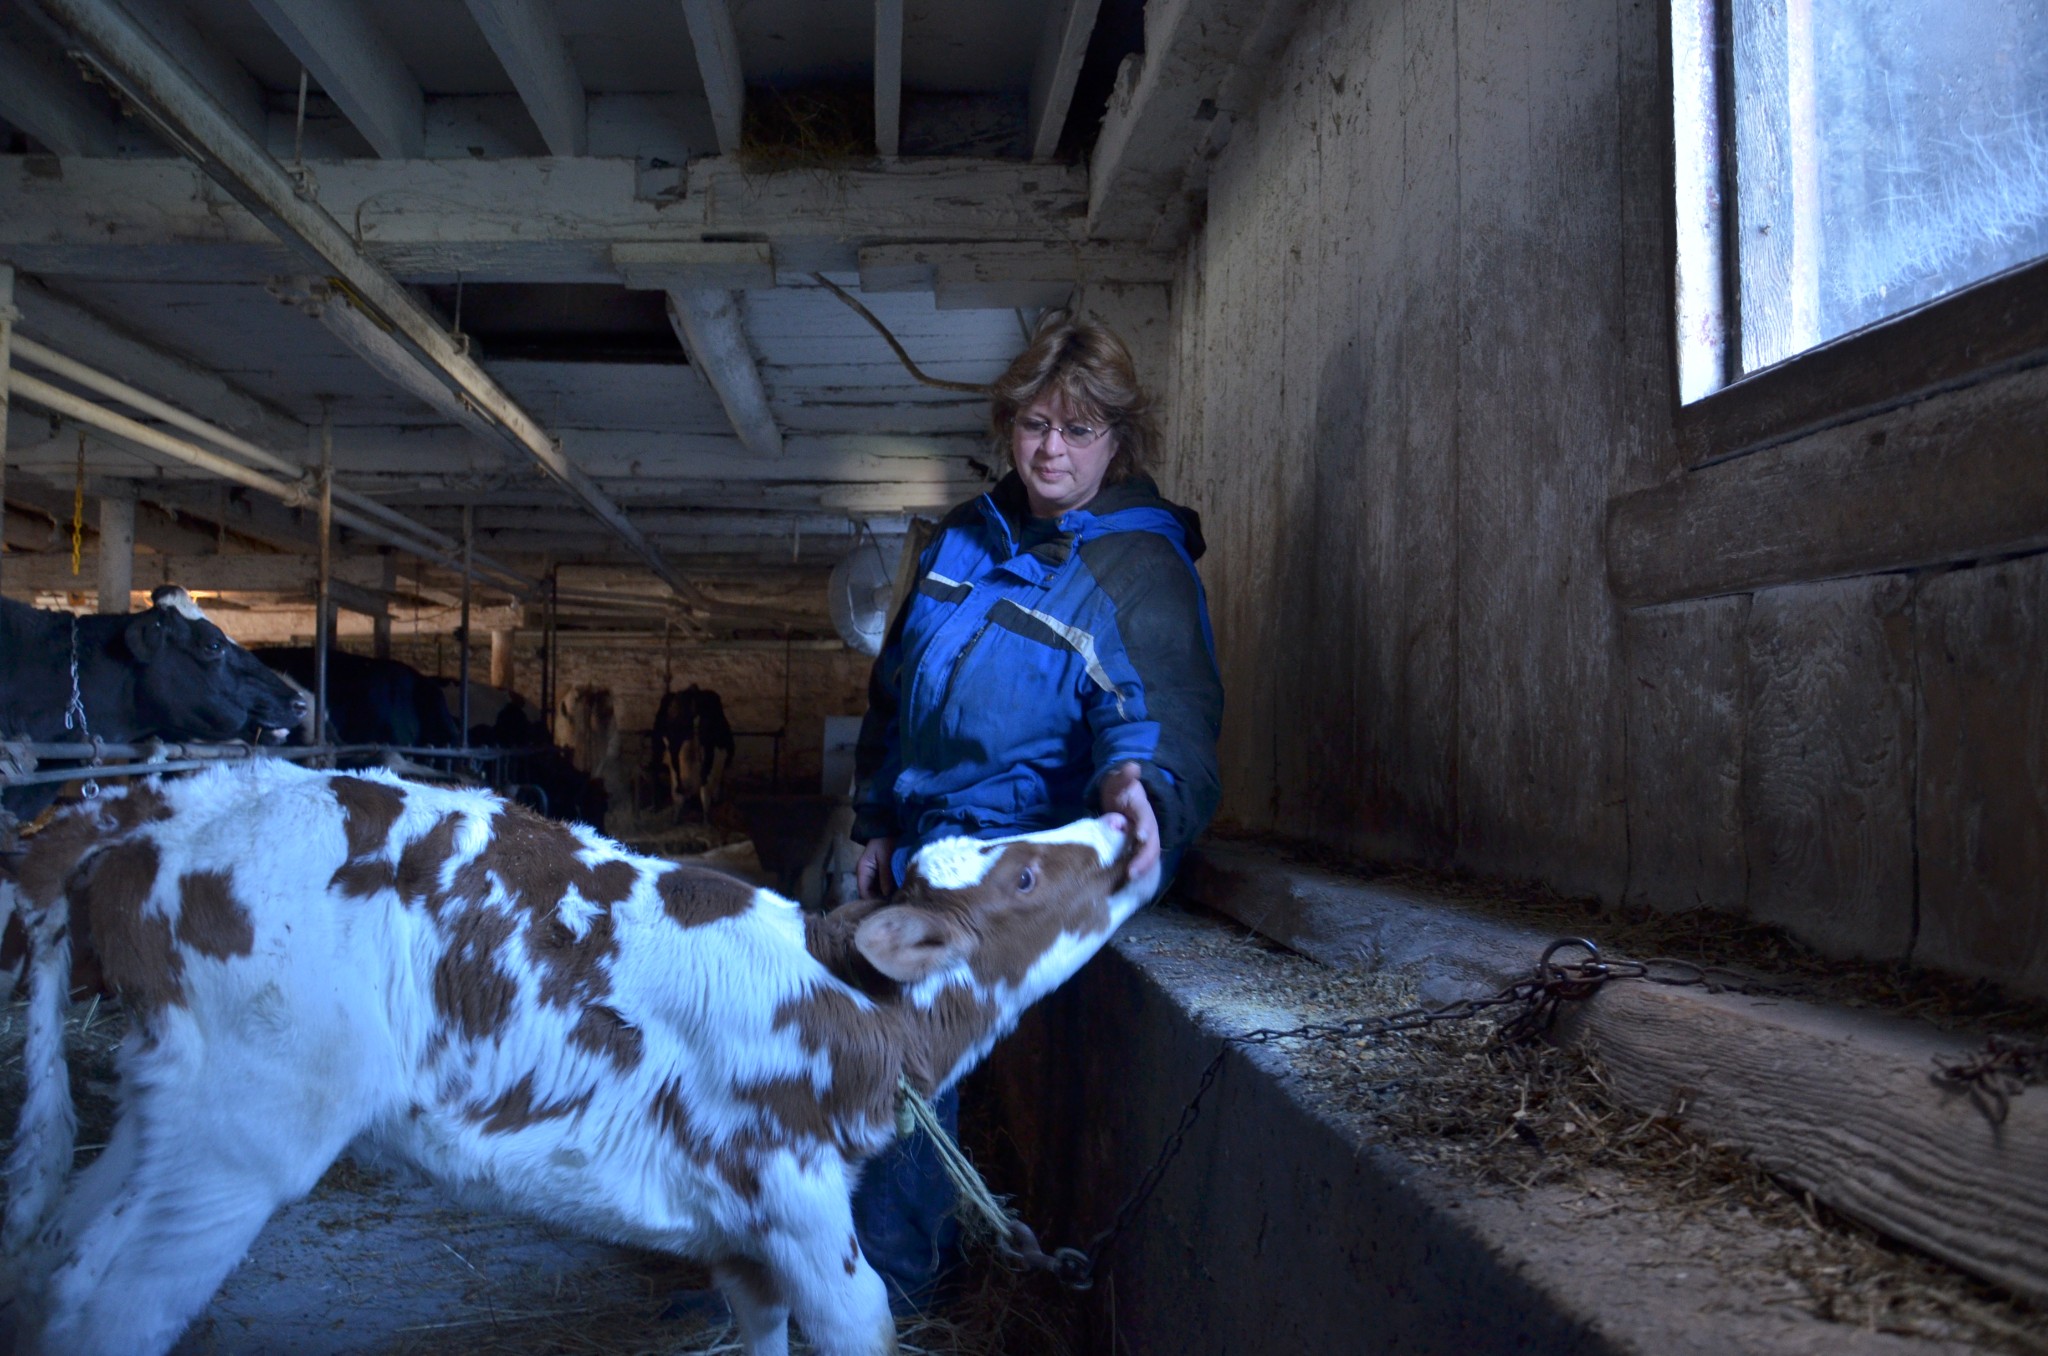 Carol French on her dairy farm, taking care of her milk cows. (Image: Dimiter Kenarov)